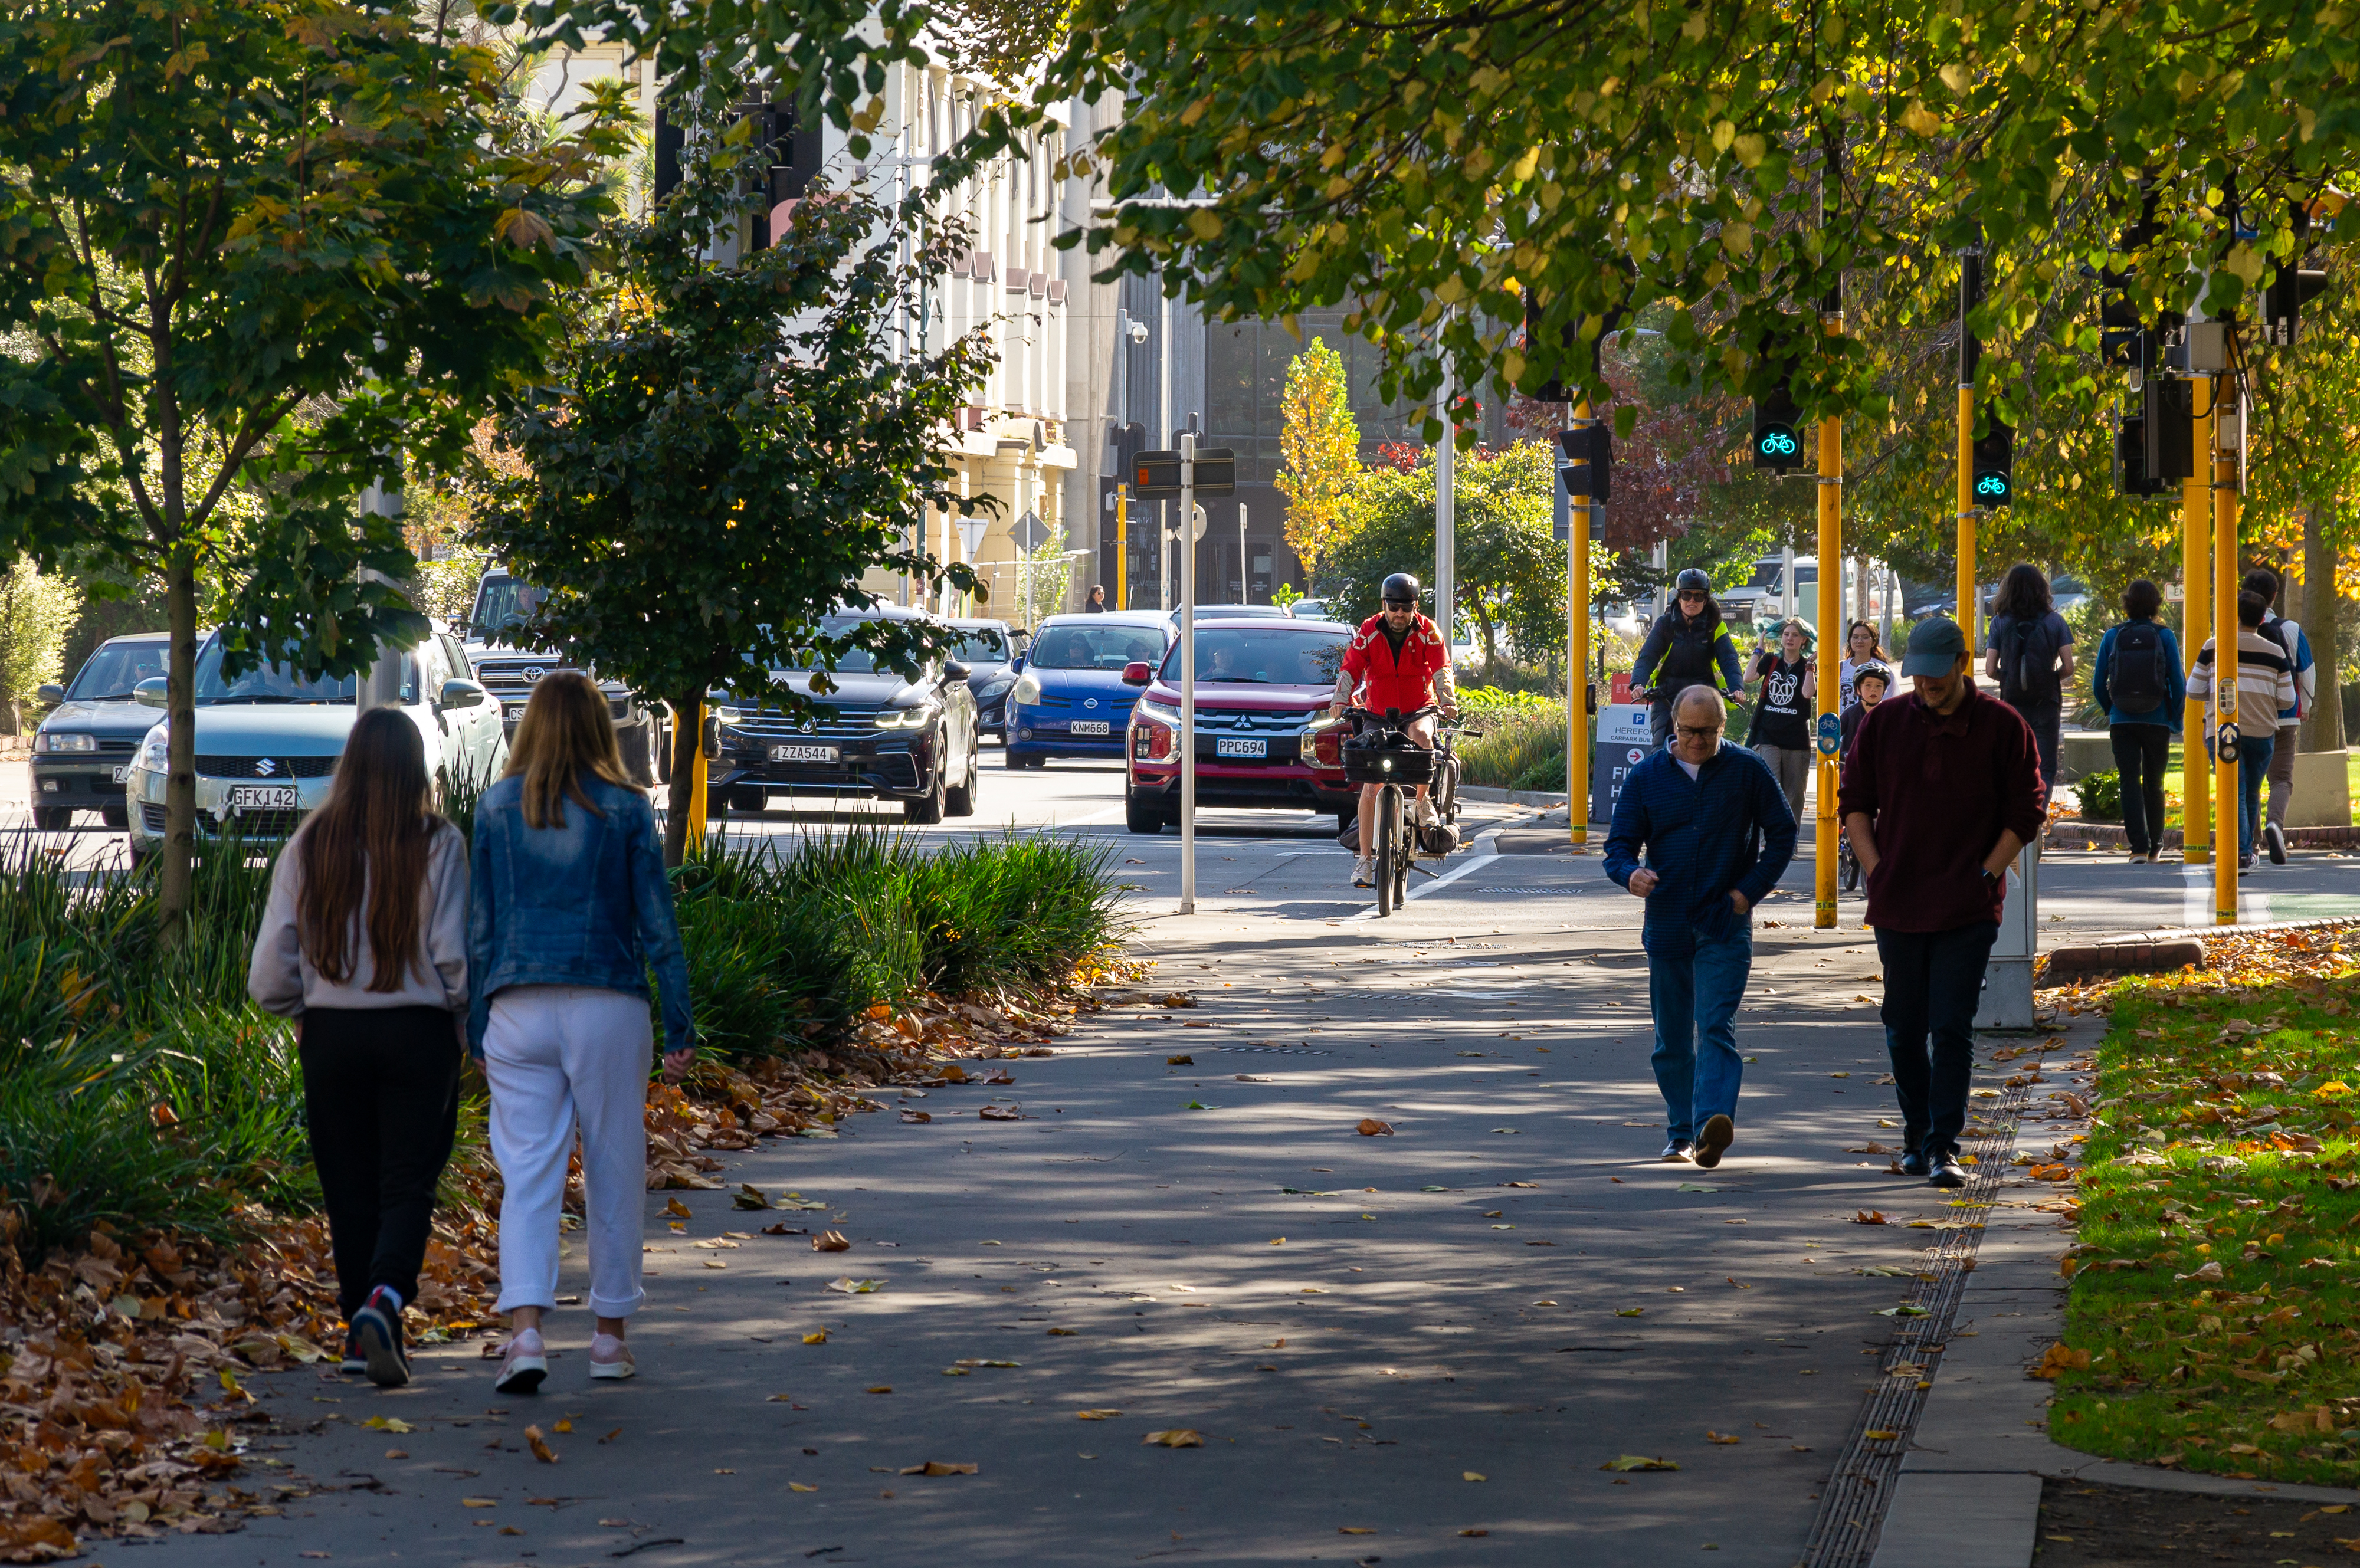 Christchurch street and footpath showing walkers, cyclists and cars on the road